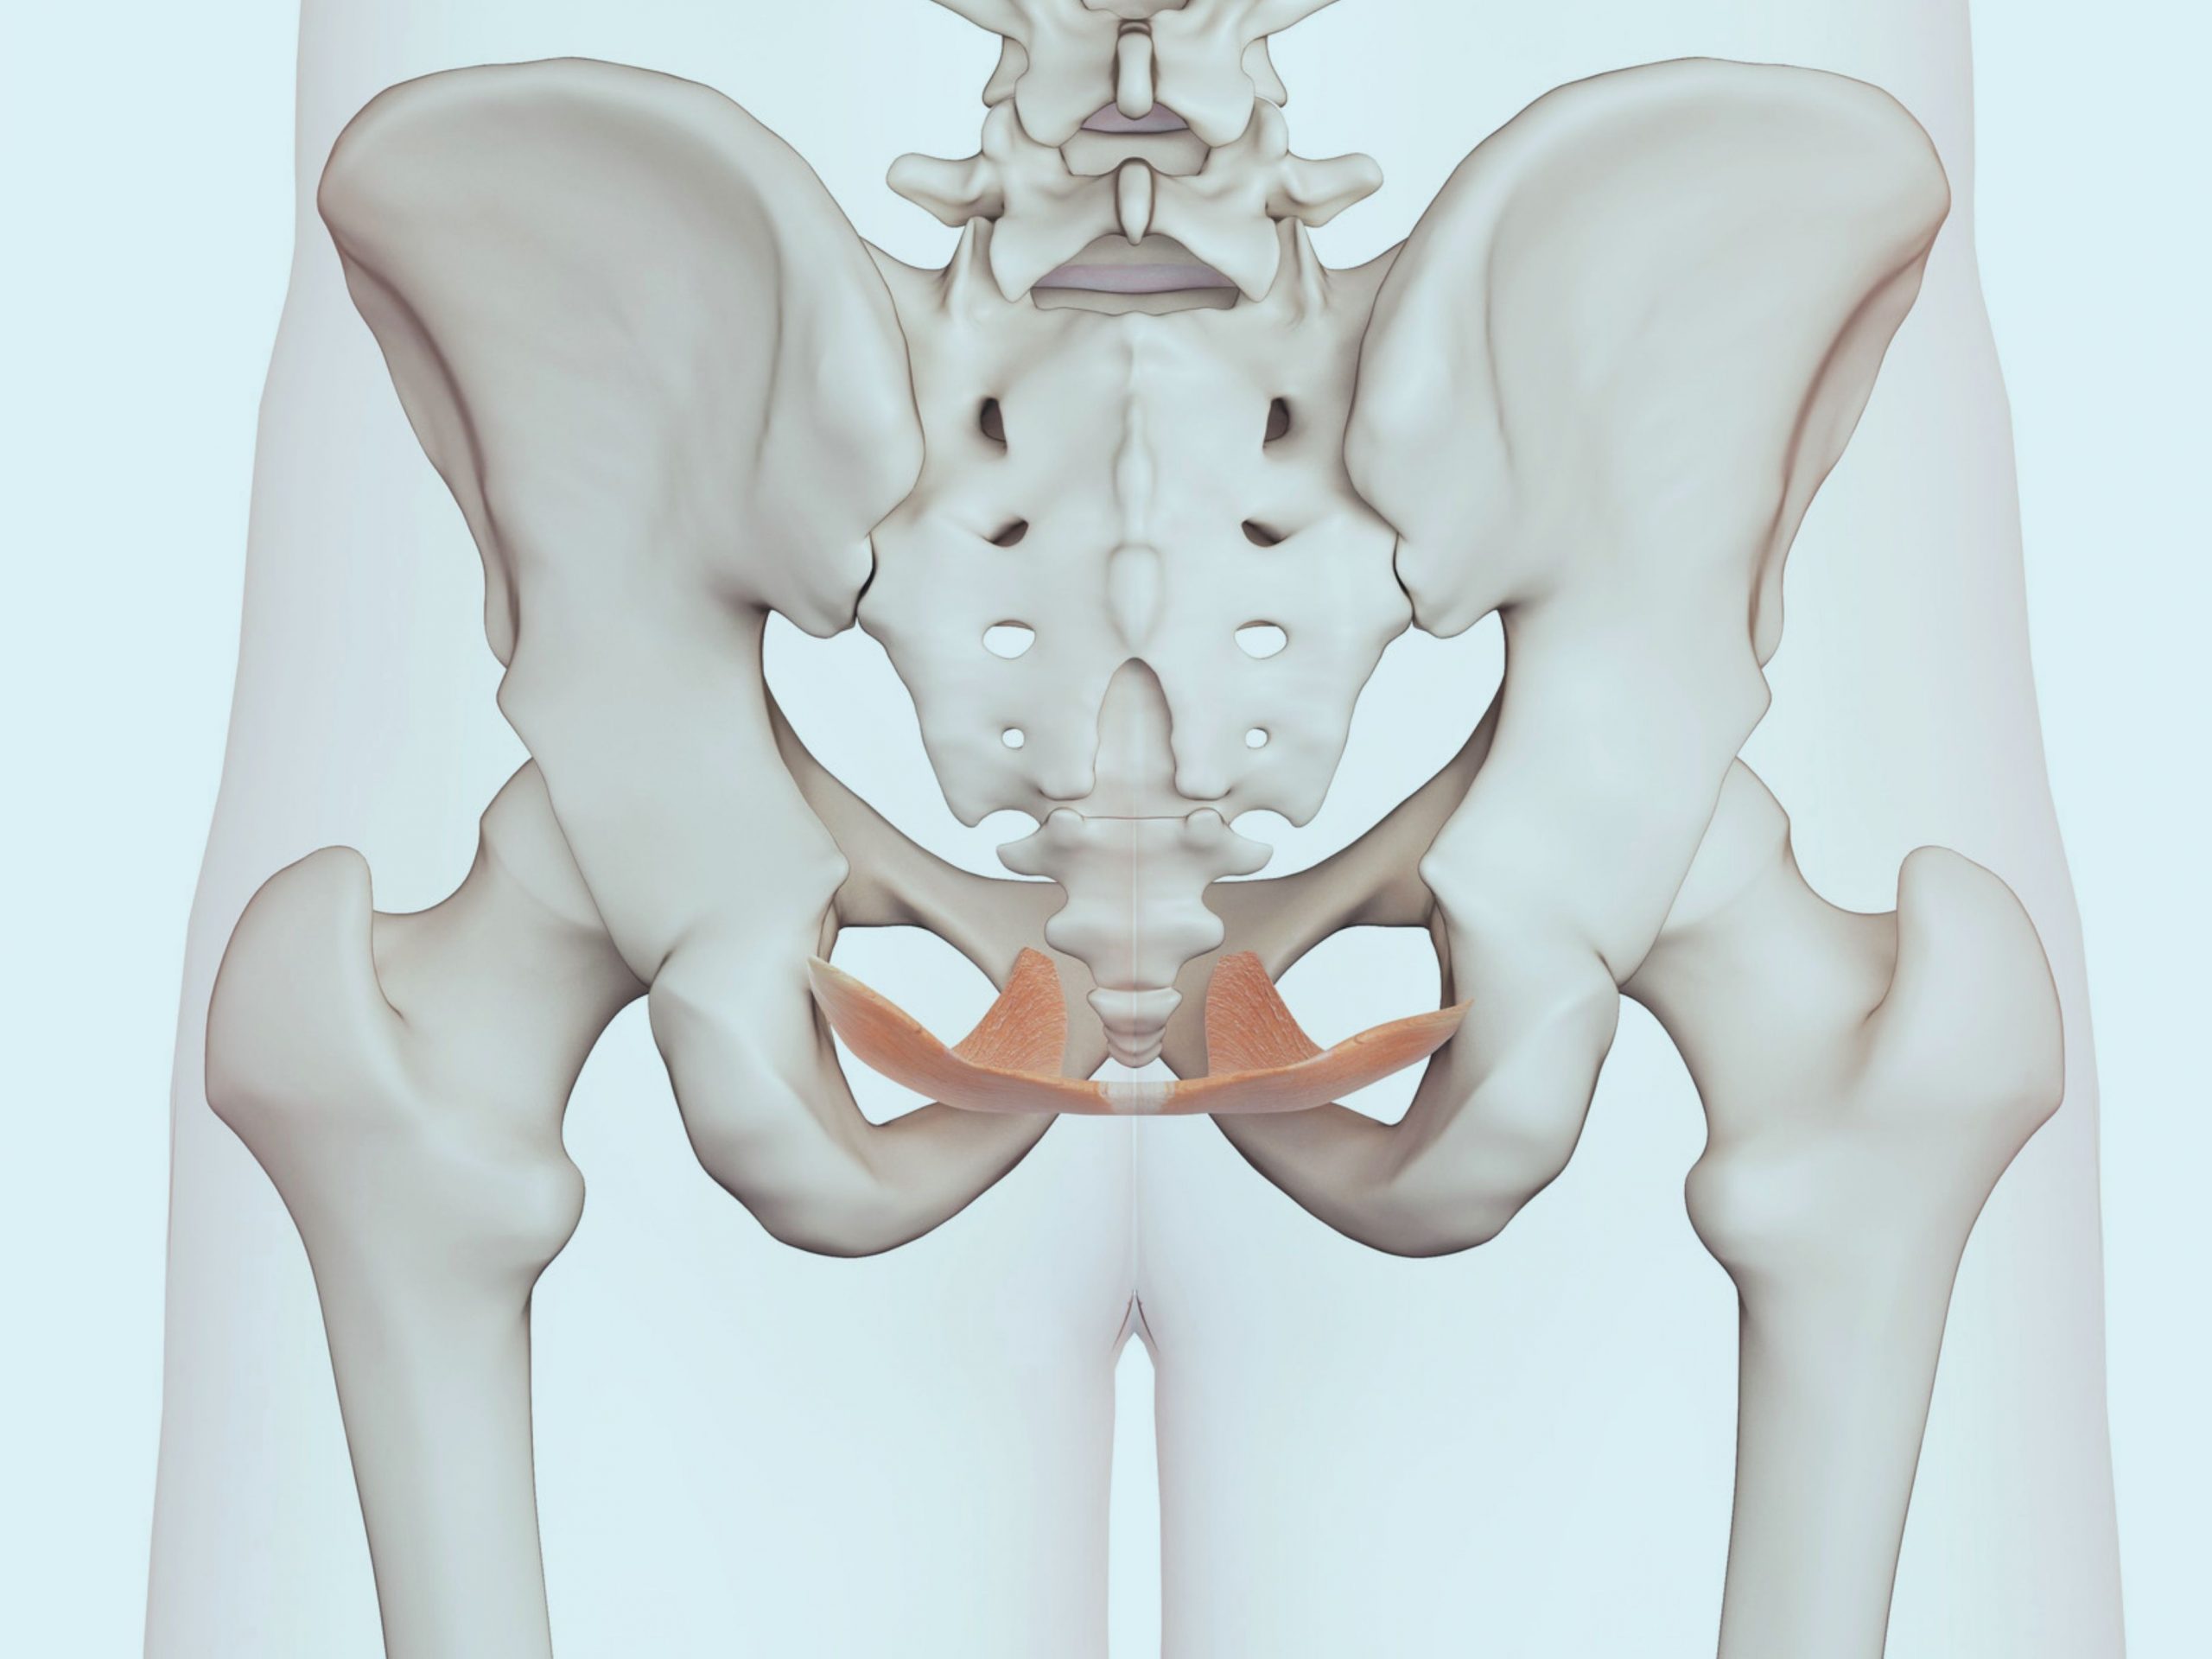 Lower back and Pelvic Girdle Pain (PGP)